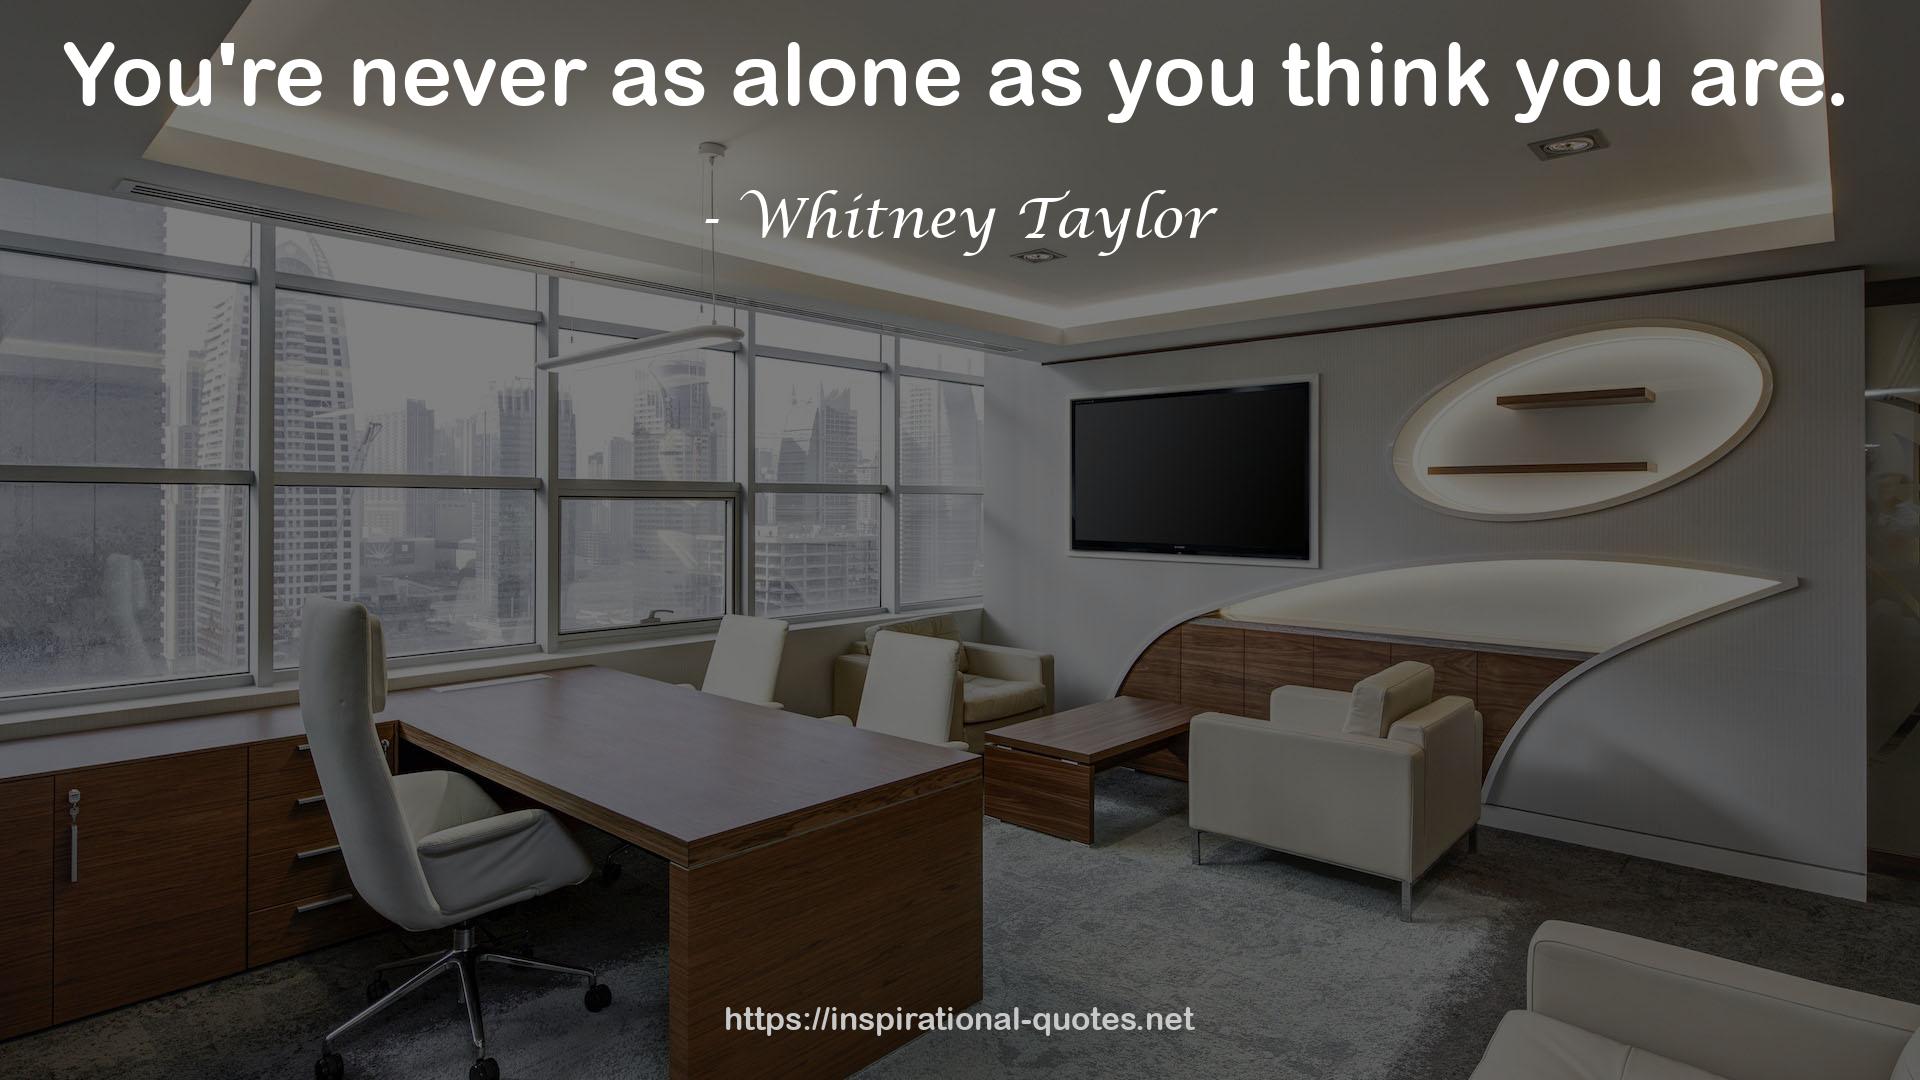 Whitney Taylor QUOTES